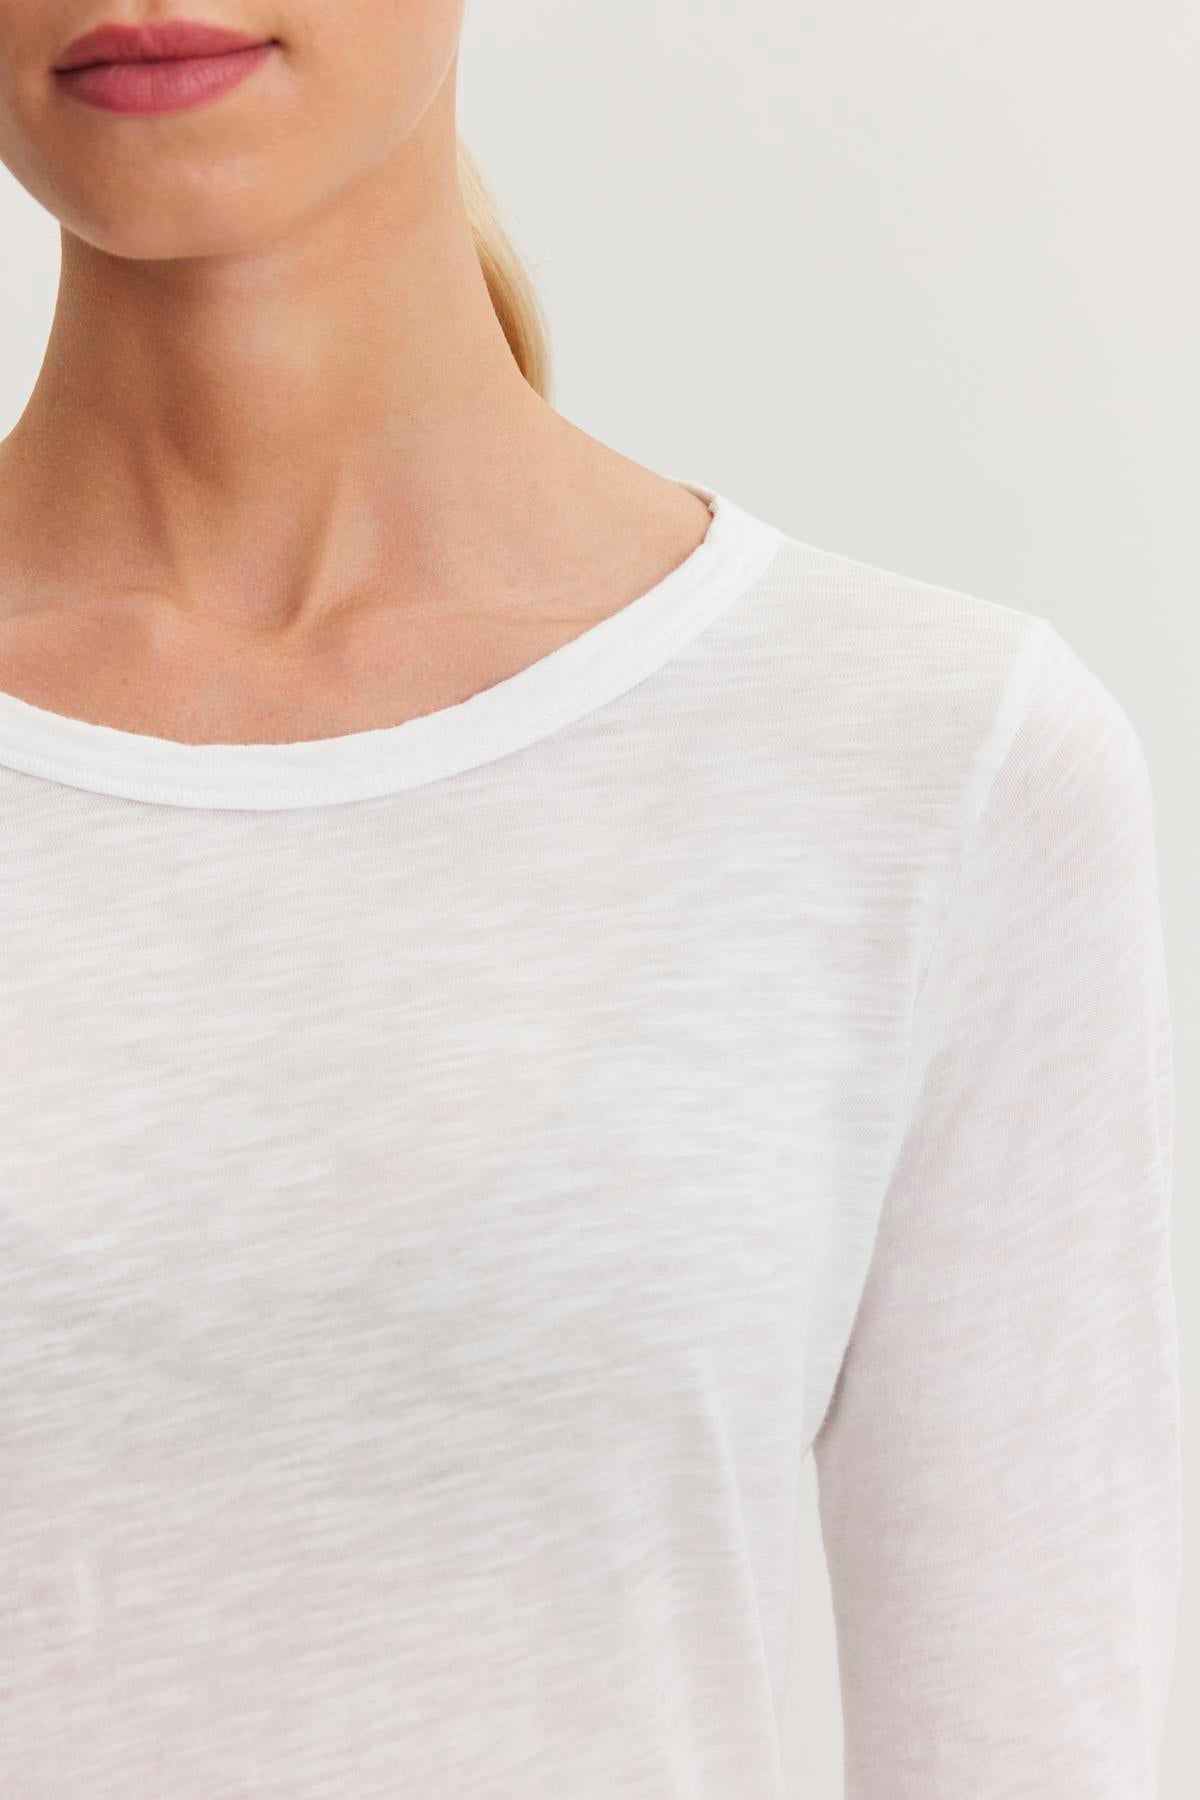 Close-up of the upper body of a person wearing a white, long-sleeve shirt made from textured cotton slub with a classic crew neckline, against a plain background. The shirt is the LIZZIE TEE by Velvet by Graham & Spencer.-37366915236033